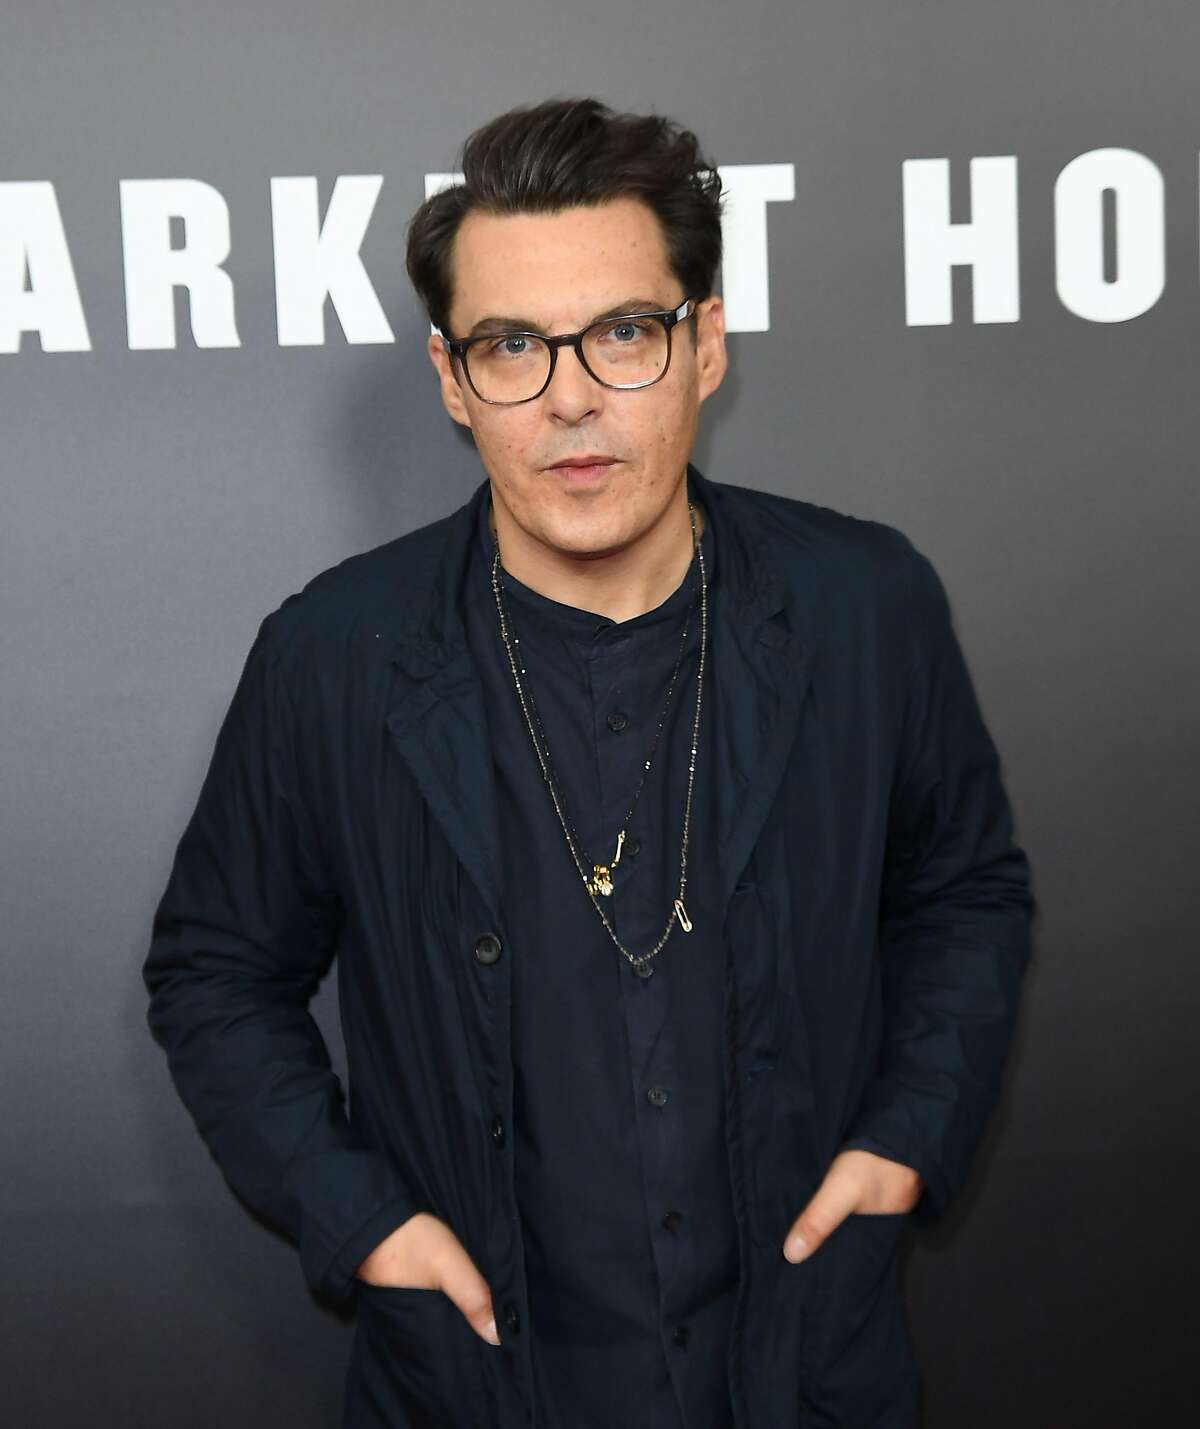 Director Joe Wright attends Focus Features' 'Darkest Hour' New York premiere at The Paris Theatre on November 15, 2017 in New York.